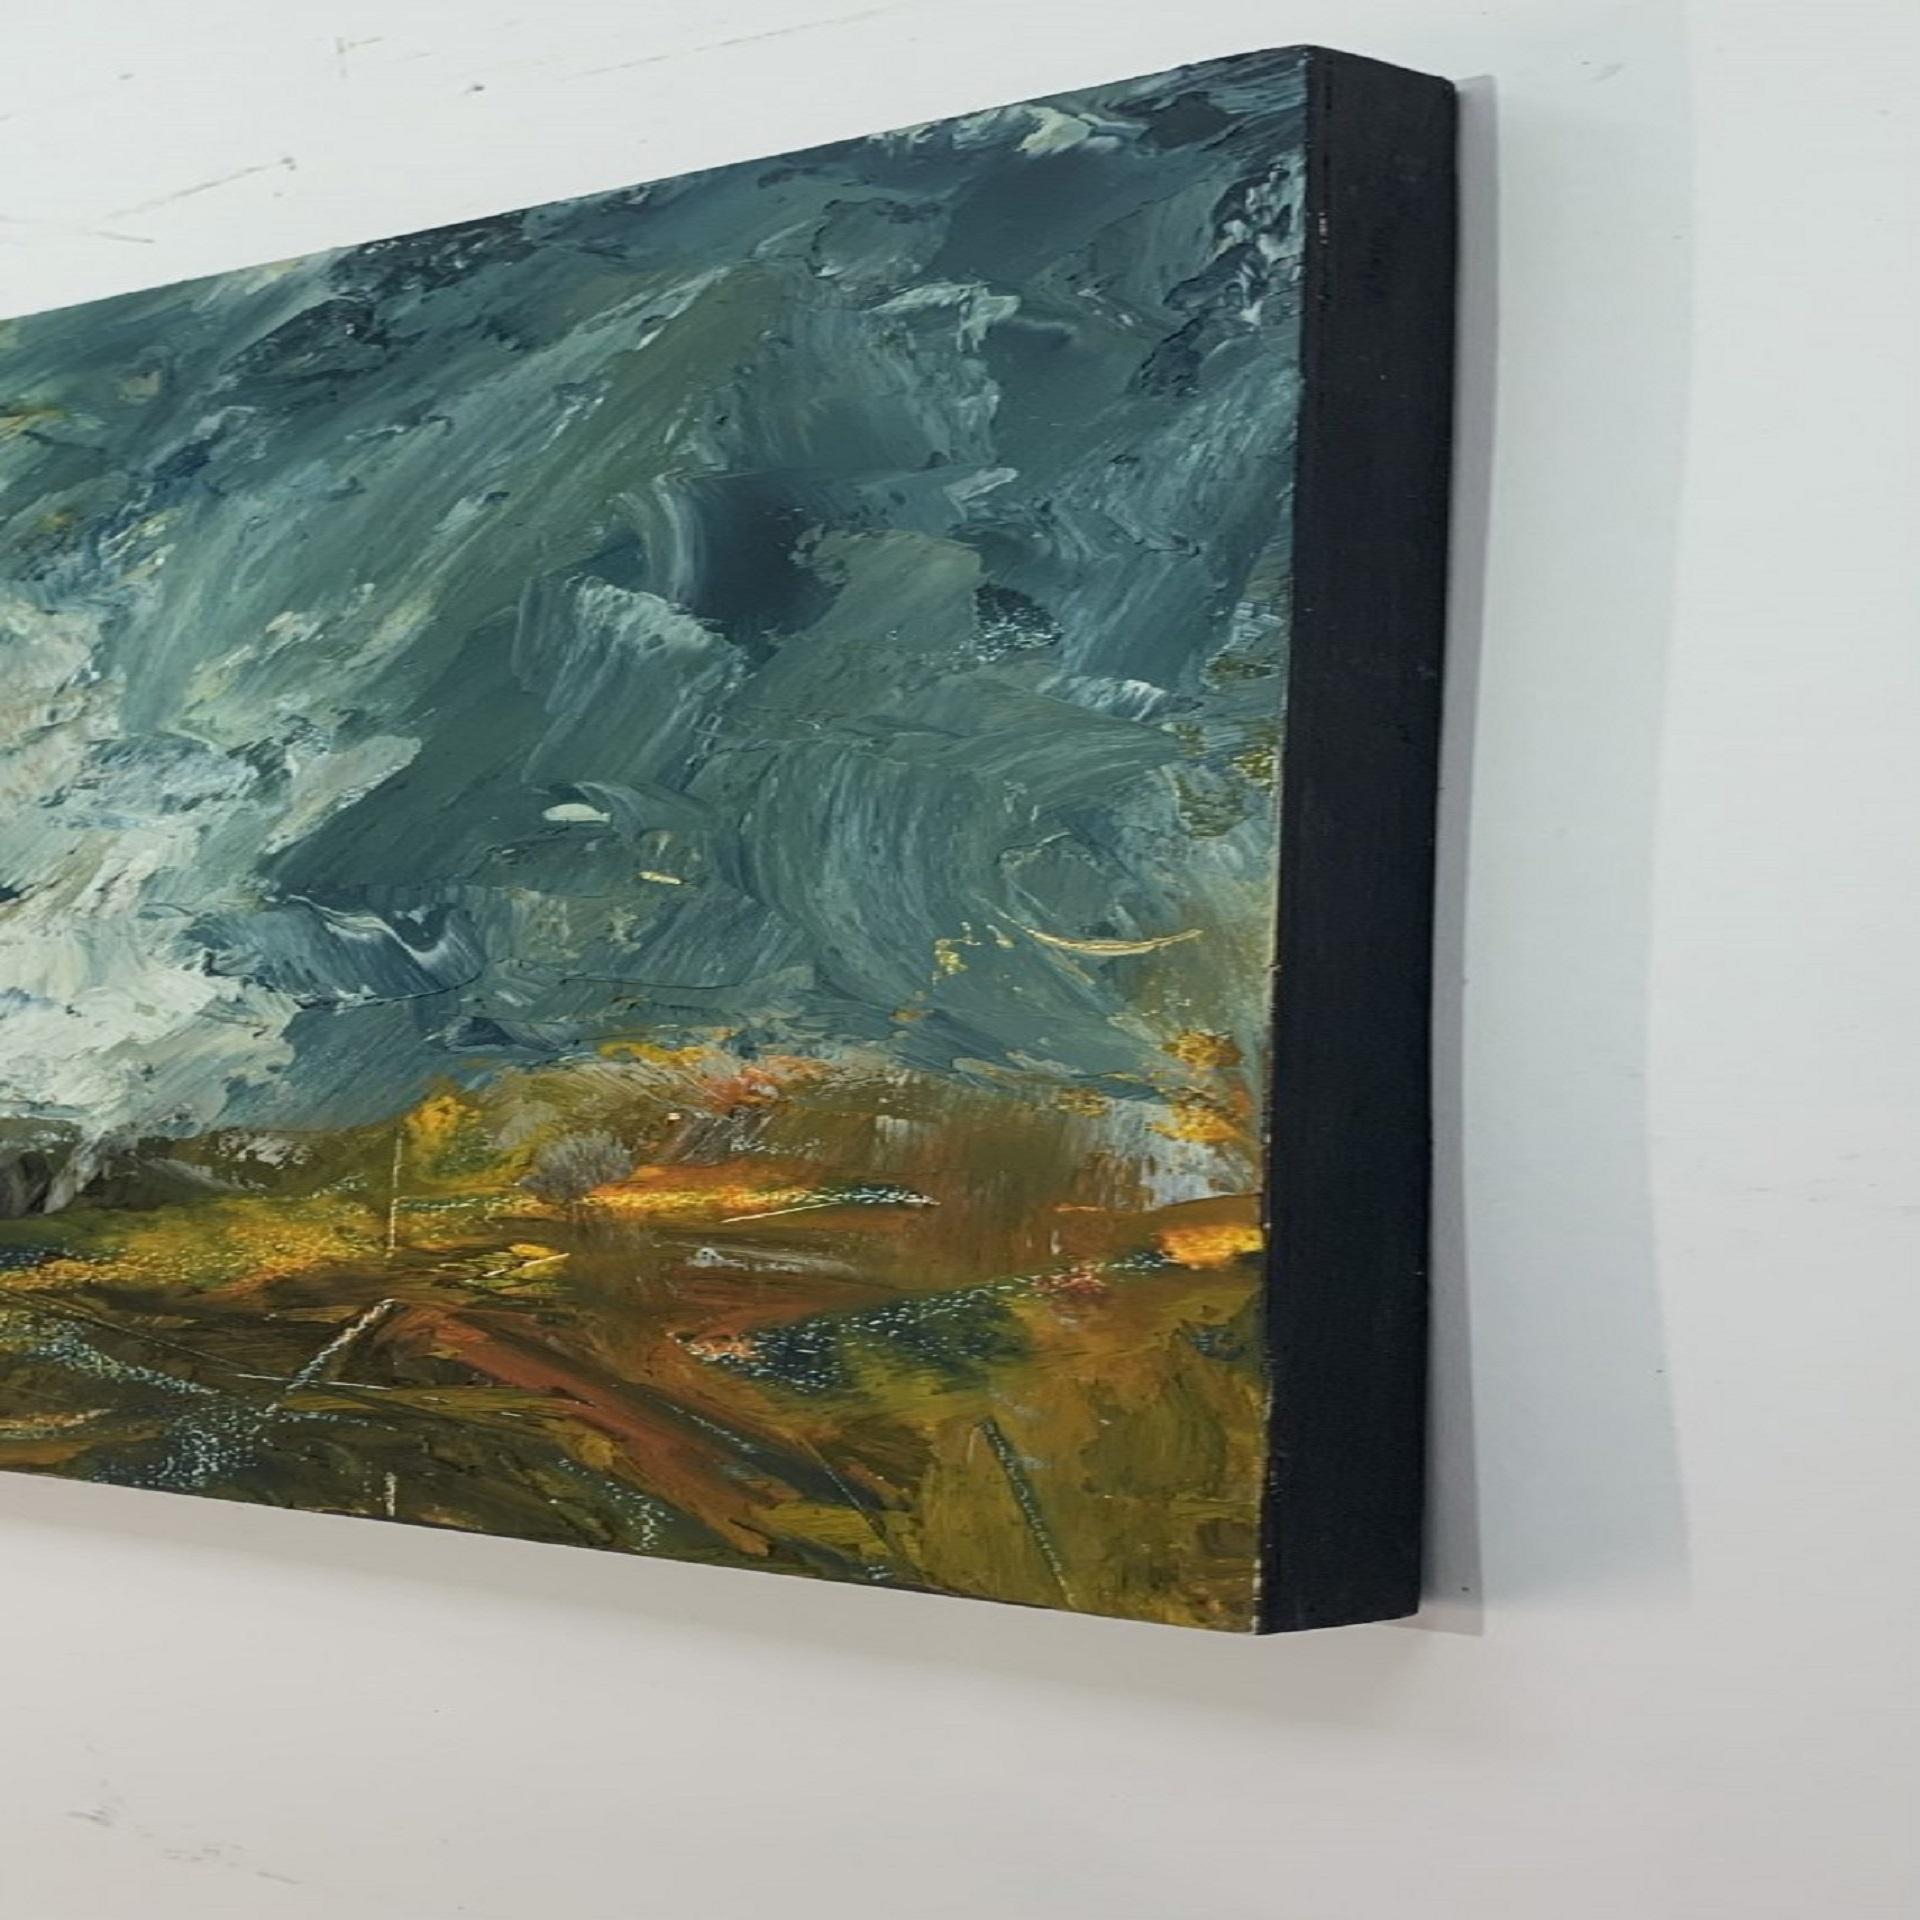 Original
Oil on birchwood panel
Image size: H:30 cm x W:30 cm
Complete Size of Unframed Work: H:30 cm x W:30 cm x D:2cm
Sold Unframed
Please note that insitu images are purely an indication of how a piece may look

Another in the series of my semi